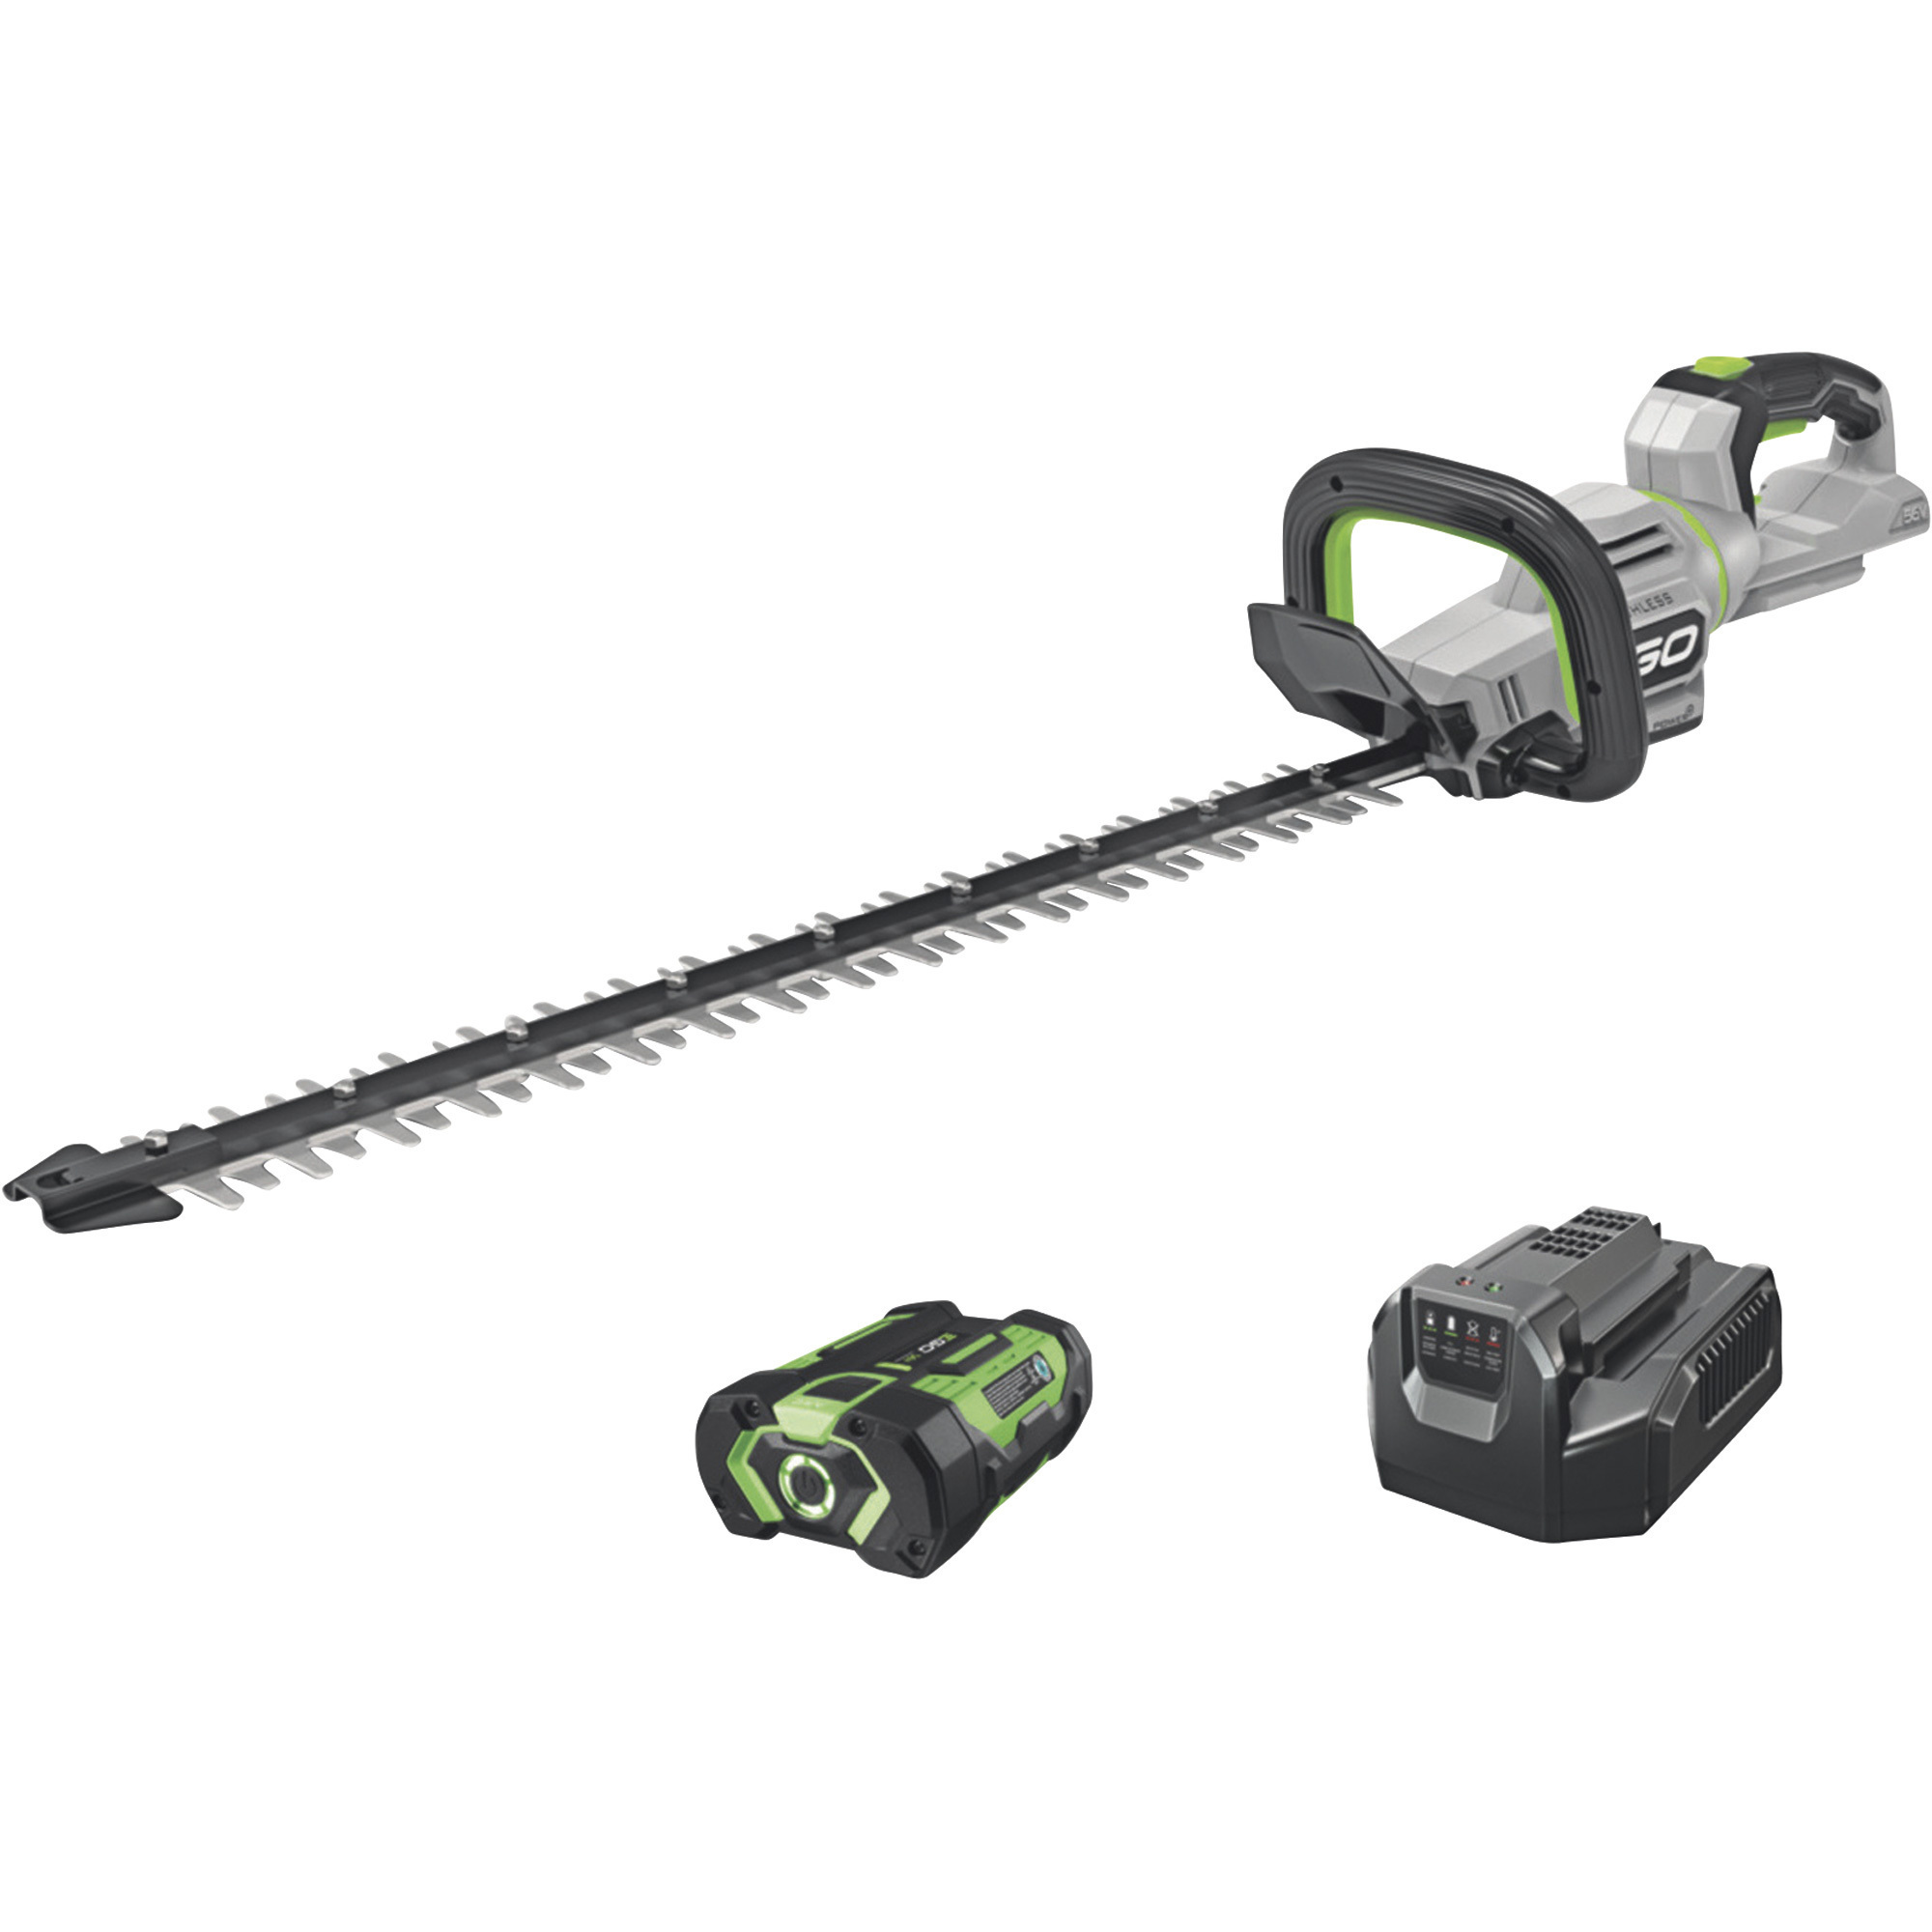 EGO Power+ Cordless Hedge Trimmer — 26in. Blades, 2.5Ah Battery, Model#  Ht2601